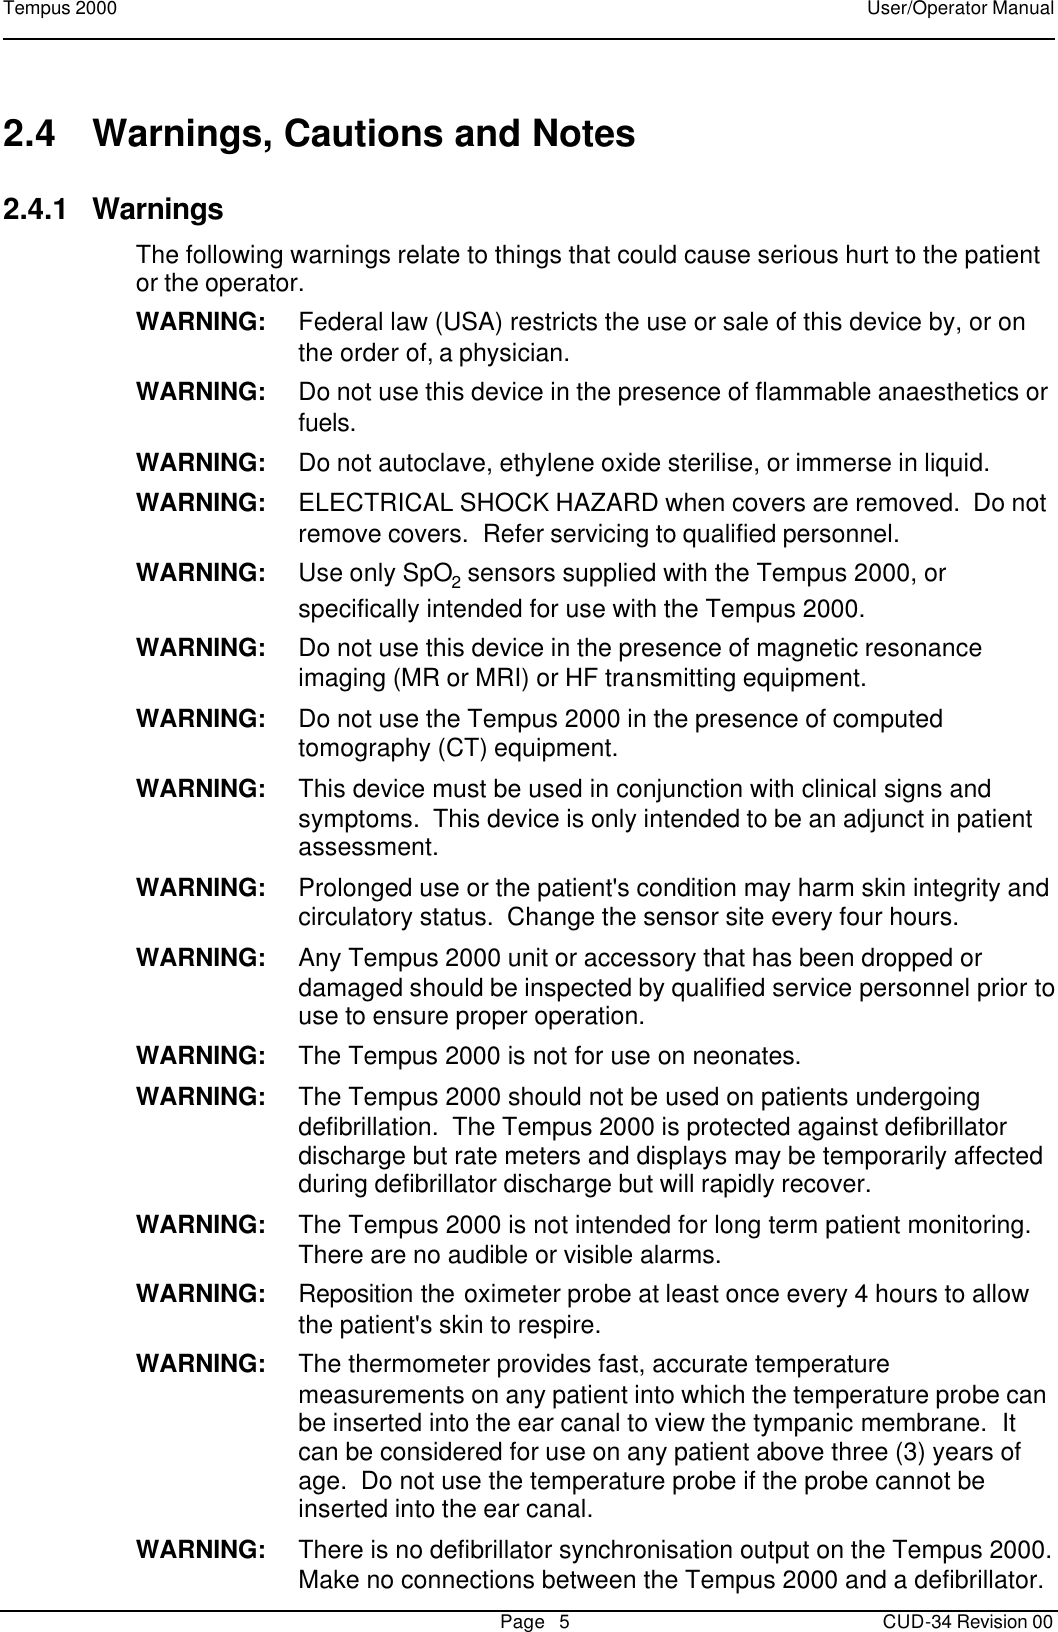 Tempus 2000    User/Operator Manual       Page   5   CUD-34 Revision 00 2.4 Warnings, Cautions and Notes 2.4.1 Warnings The following warnings relate to things that could cause serious hurt to the patient or the operator. WARNING: Federal law (USA) restricts the use or sale of this device by, or on the order of, a physician. WARNING: Do not use this device in the presence of flammable anaesthetics or fuels. WARNING: Do not autoclave, ethylene oxide sterilise, or immerse in liquid.   WARNING: ELECTRICAL SHOCK HAZARD when covers are removed.  Do not remove covers.  Refer servicing to qualified personnel. WARNING: Use only SpO2 sensors supplied with the Tempus 2000, or specifically intended for use with the Tempus 2000. WARNING: Do not use this device in the presence of magnetic resonance imaging (MR or MRI) or HF transmitting equipment. WARNING: Do not use the Tempus 2000 in the presence of computed tomography (CT) equipment. WARNING: This device must be used in conjunction with clinical signs and symptoms.  This device is only intended to be an adjunct in patient assessment. WARNING: Prolonged use or the patient&apos;s condition may harm skin integrity and circulatory status.  Change the sensor site every four hours. WARNING: Any Tempus 2000 unit or accessory that has been dropped or damaged should be inspected by qualified service personnel prior to use to ensure proper operation. WARNING: The Tempus 2000 is not for use on neonates. WARNING: The Tempus 2000 should not be used on patients undergoing defibrillation.  The Tempus 2000 is protected against defibrillator discharge but rate meters and displays may be temporarily affected during defibrillator discharge but will rapidly recover. WARNING: The Tempus 2000 is not intended for long term patient monitoring.  There are no audible or visible alarms. WARNING: Reposition the oximeter probe at least once every 4 hours to allow the patient&apos;s skin to respire. WARNING: The thermometer provides fast, accurate temperature measurements on any patient into which the temperature probe can be inserted into the ear canal to view the tympanic membrane.  It can be considered for use on any patient above three (3) years of age.  Do not use the temperature probe if the probe cannot be inserted into the ear canal. WARNING: There is no defibrillator synchronisation output on the Tempus 2000.  Make no connections between the Tempus 2000 and a defibrillator.   